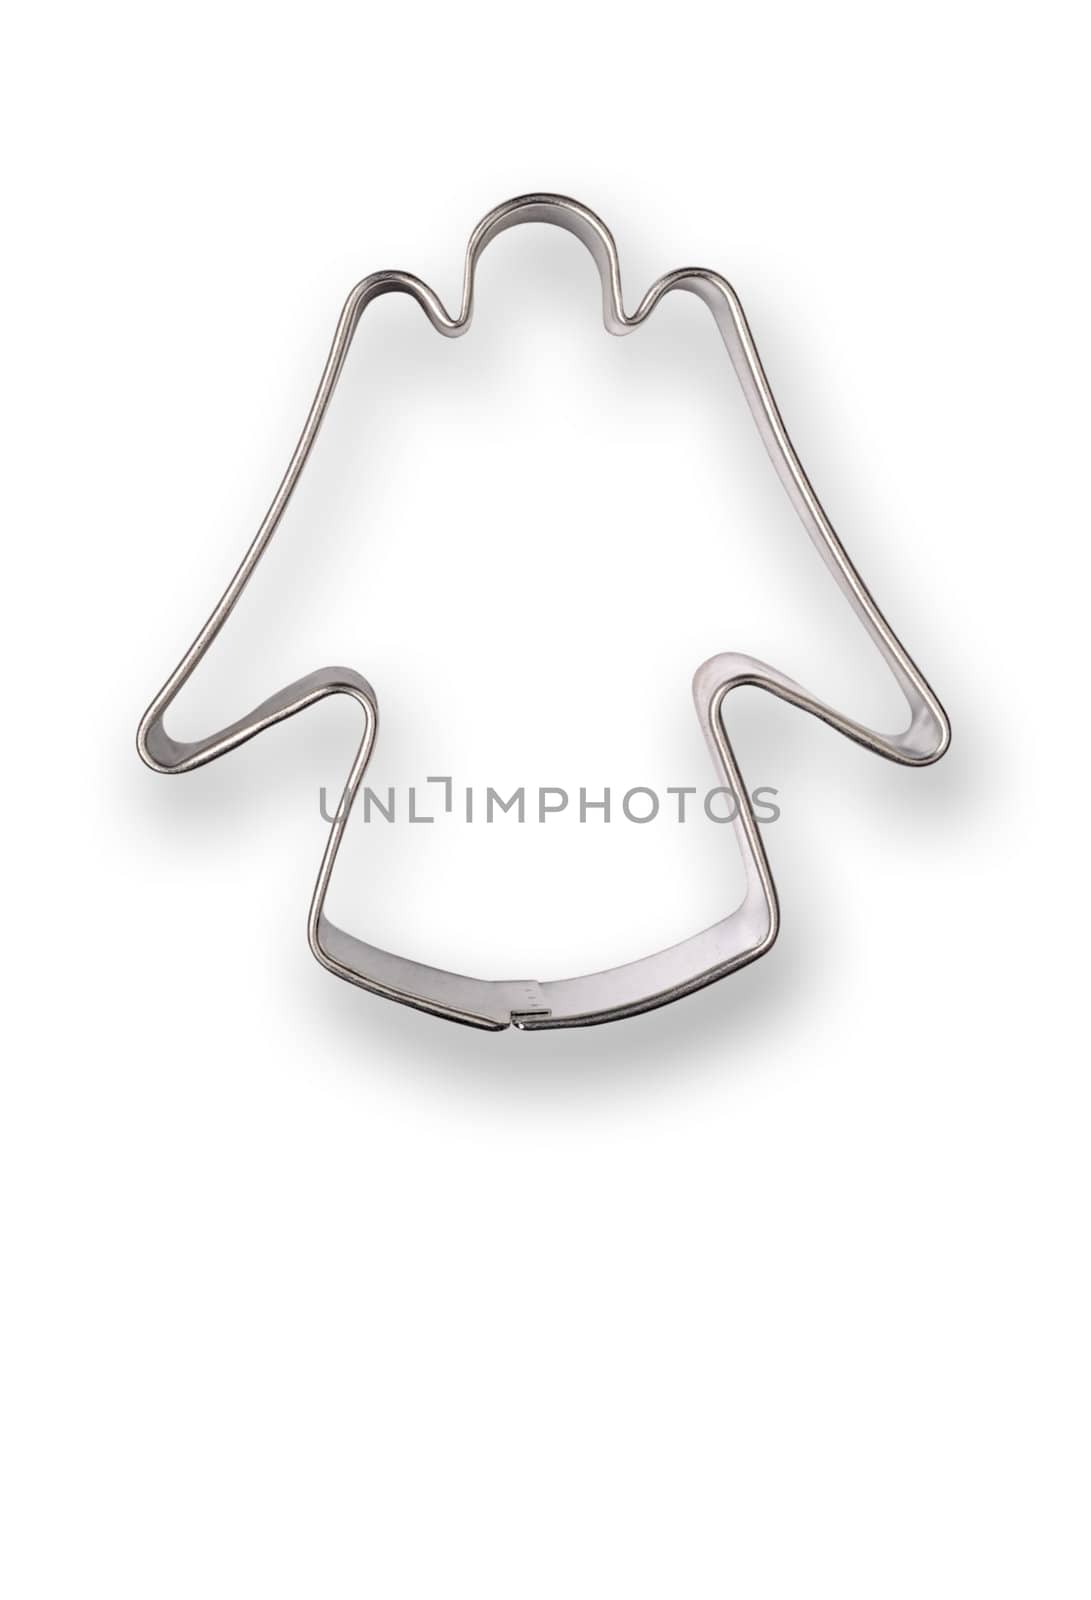 Angel shaped cookie cutter by Laborer